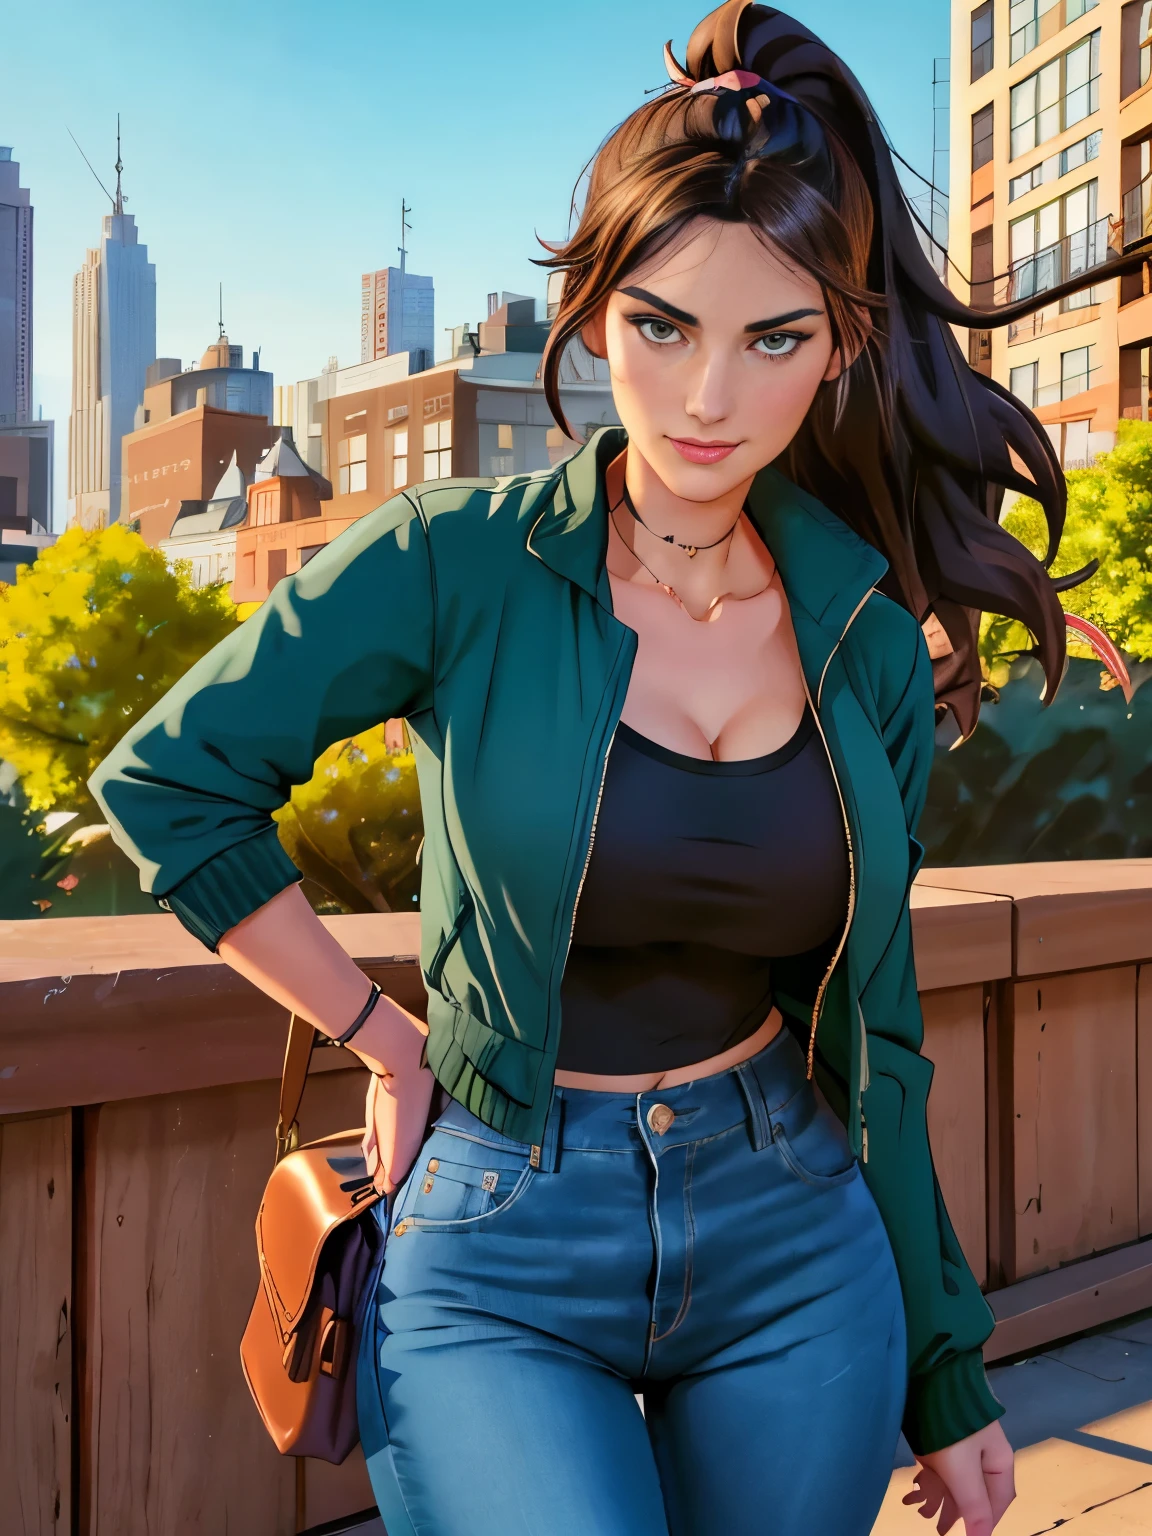 (masterpiece, top quality, best quality, official art, beautiful and aesthetic:1.2), (1girl:1.3), dark brown hair pulled back, elegant updo, extremely detailed, portrait, looking at viewer, facing viewer, solo, (full body:0.6), detailed background, close up, kindly eyes, (warm summer park theme:1.1), busty woman, charlatan, smirk, mysterious, long hair, huge ponytail, slim, thin, athletic, womanly, elastic woman, dark green jacket, tank top, blue jeans, hair bandana, camera bag, brunette, city, heroic, cheerful, city exterior, park, street, daylight, soft lighting, natural lighting, athletic, strong, slim waist, slim hips, long legs, muscular legs, modern (city park exterior:1.1) background, bright mysterious lighting, shadows, magical atmosphere, dutch angle, (Abigail Shapiro)